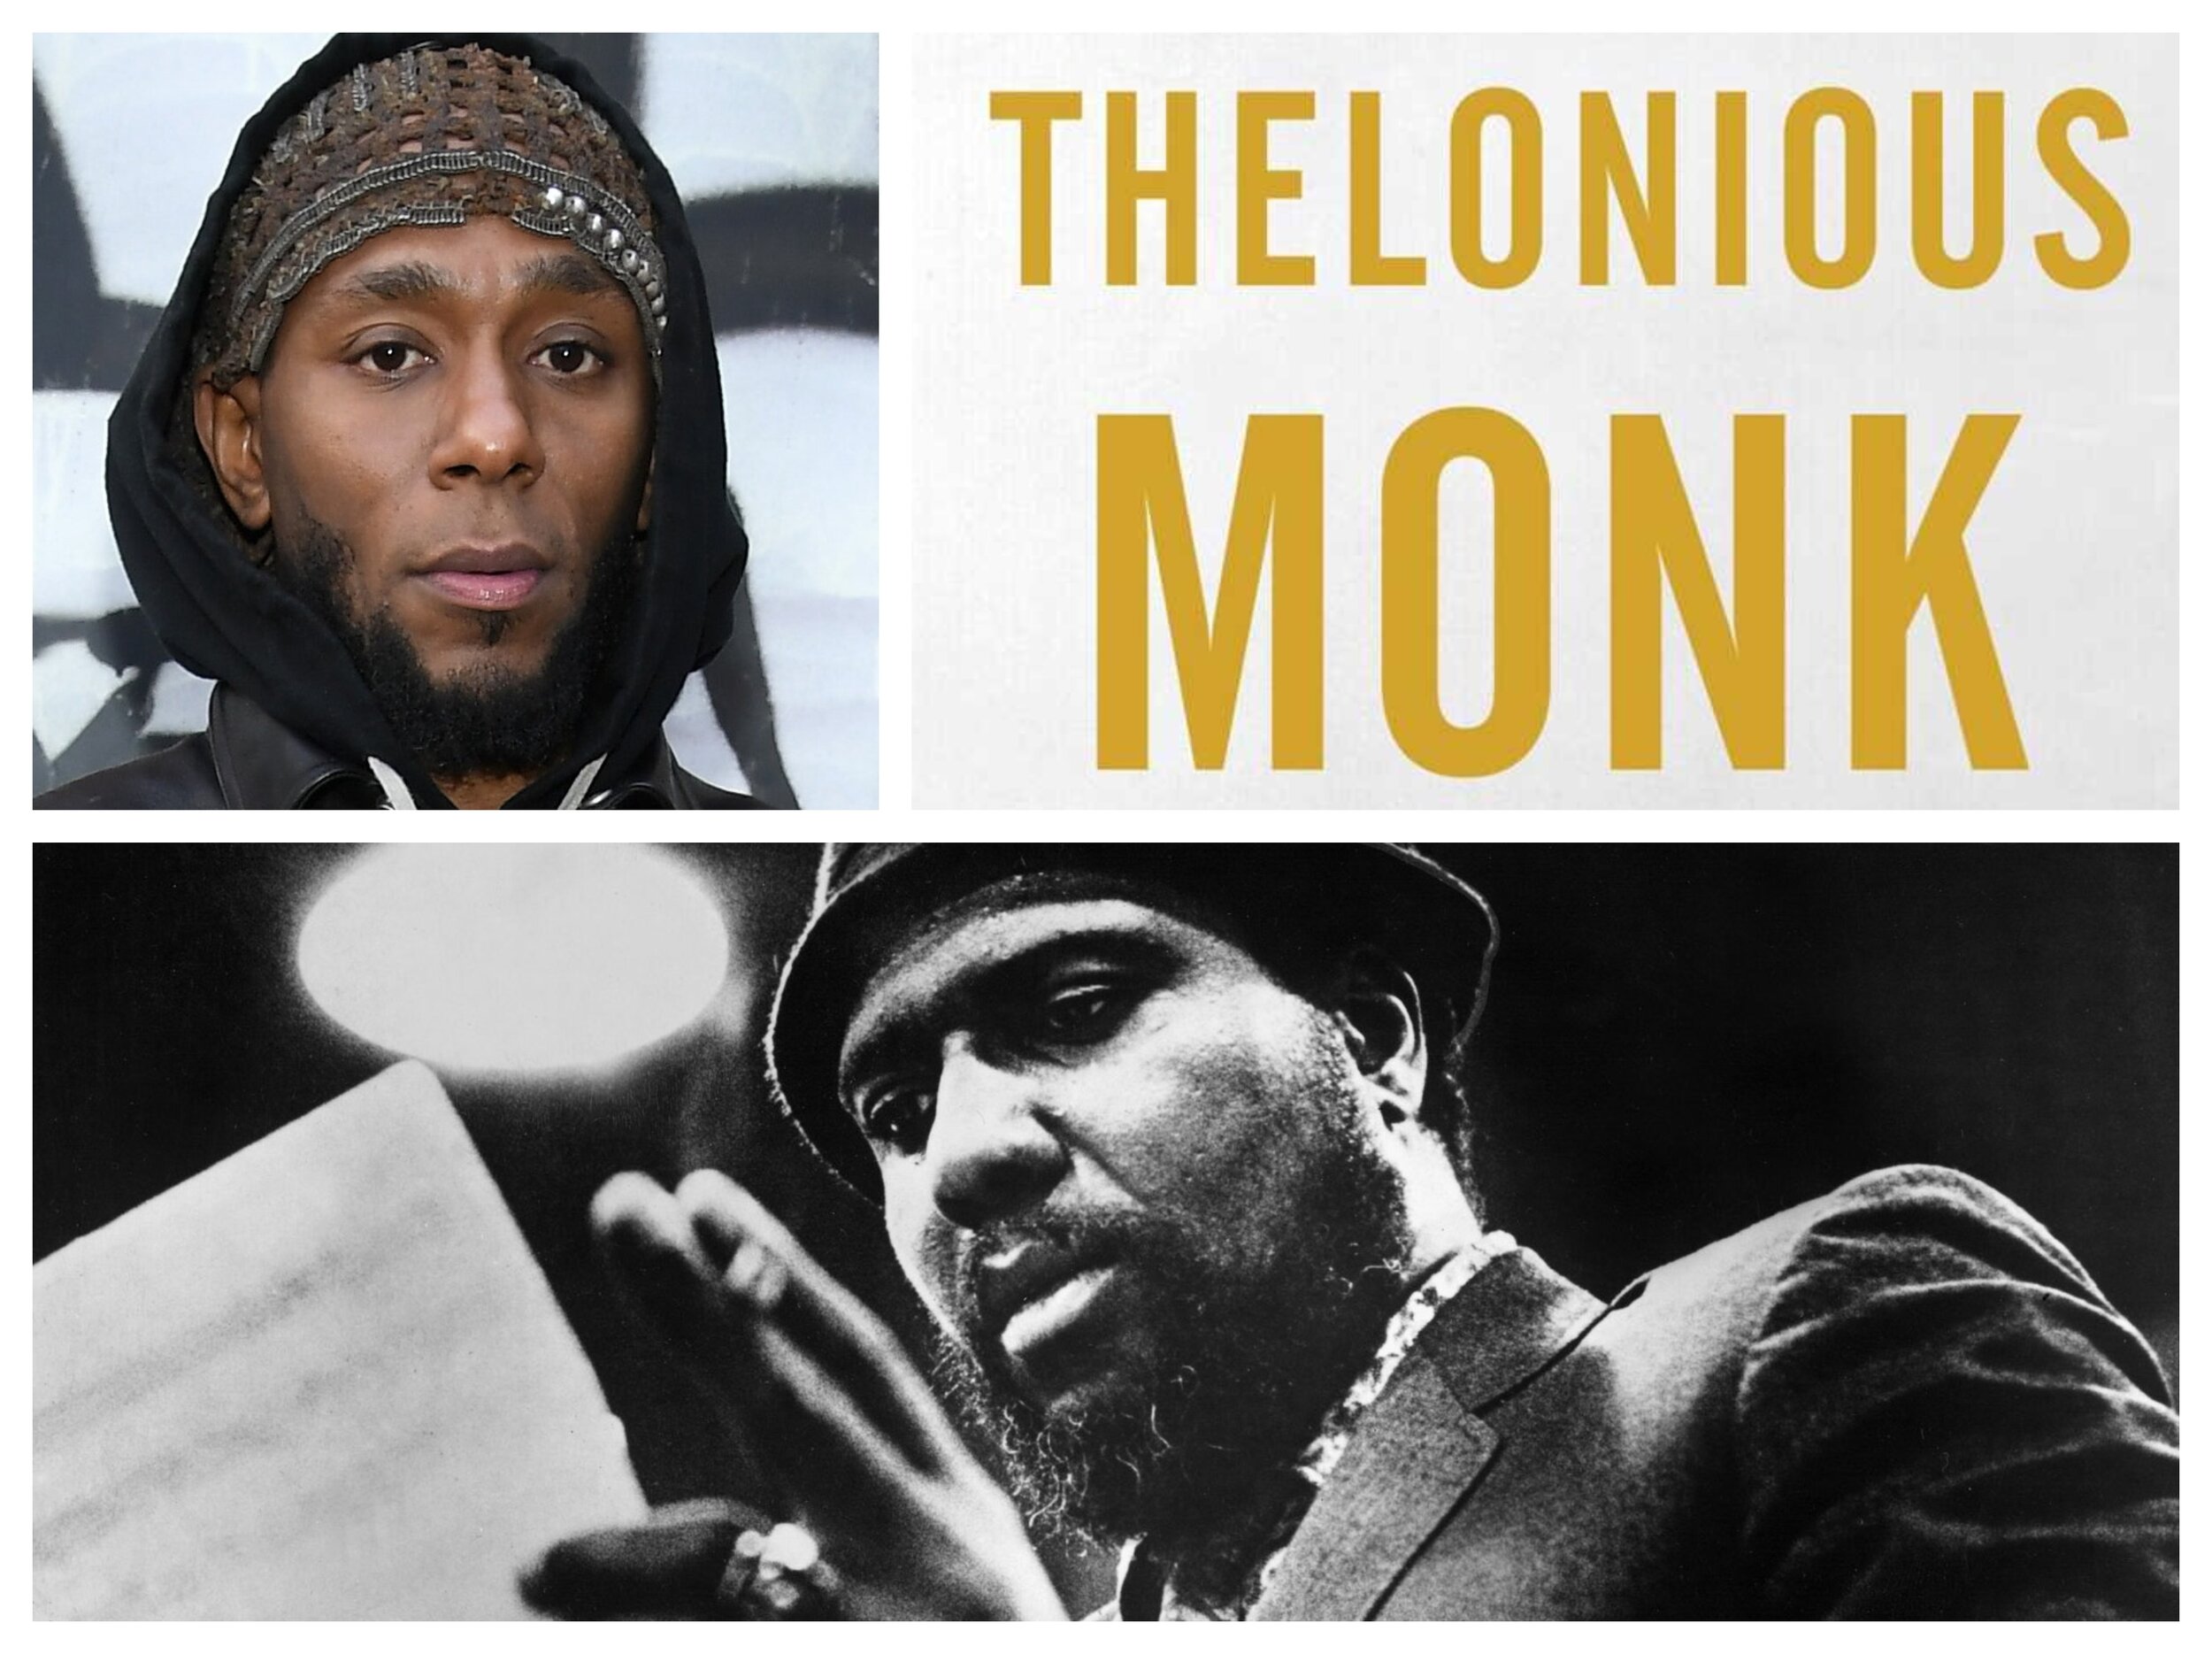 Yasiin Bey, formerly known as Mos Def, cast as Jazz Great Thelonious Monk  in New Theatrical Biopic - SSZEE MEDIA